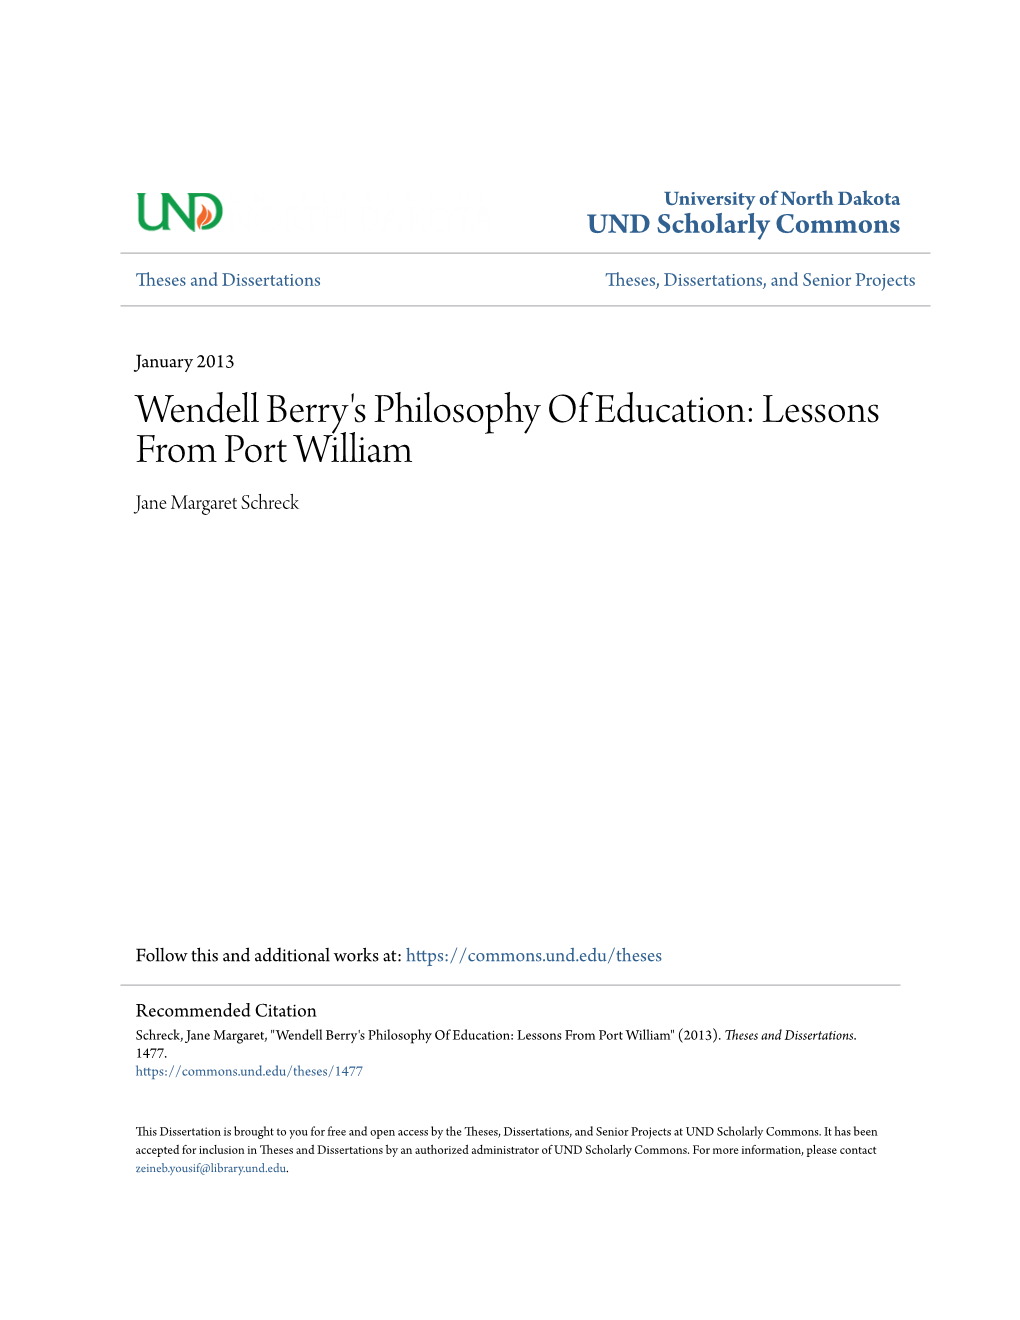 Wendell Berry's Philosophy of Education: Lessons from Port William Jane Margaret Schreck